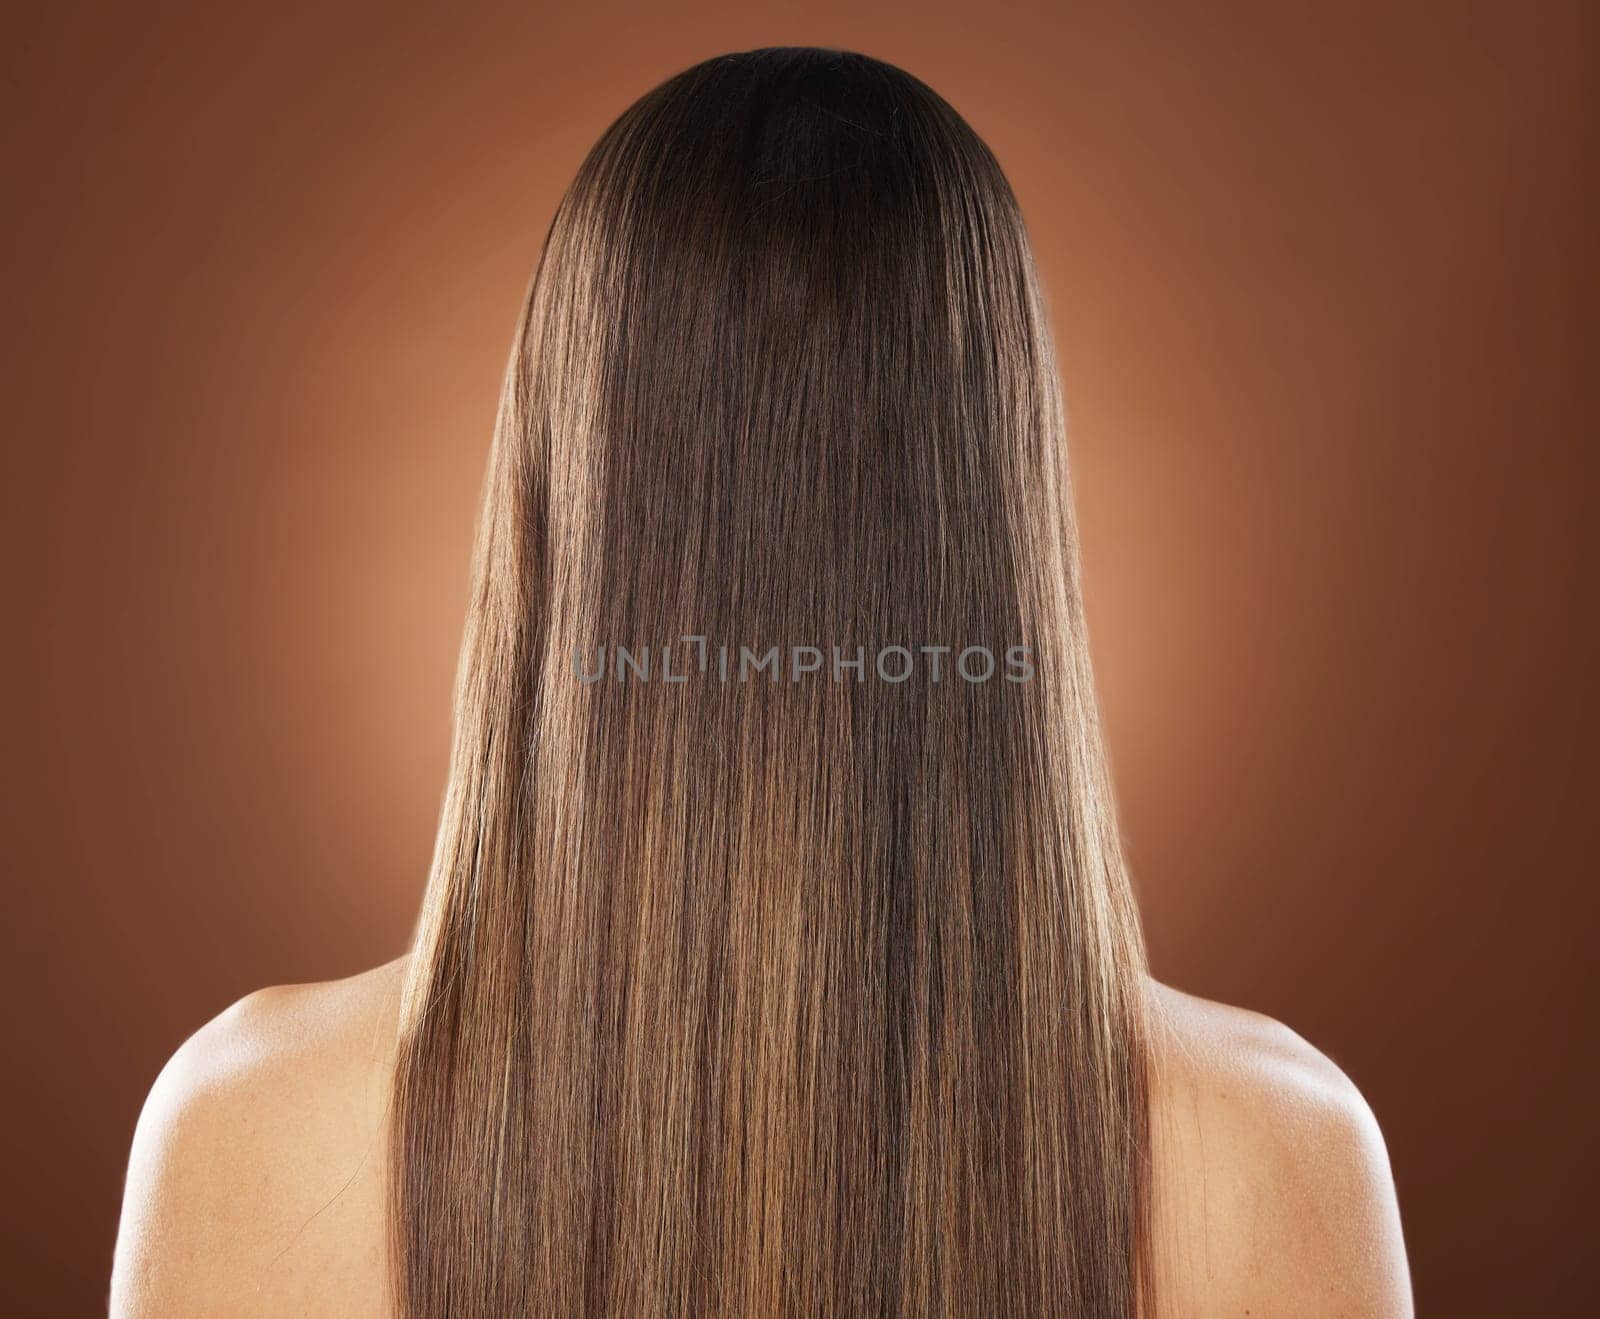 Woman, back or hair style on brown background in relax studio for keratin treatment, self care wellness or color dye routine. Model, texture or brunette growth aesthetic with balayage transformation.